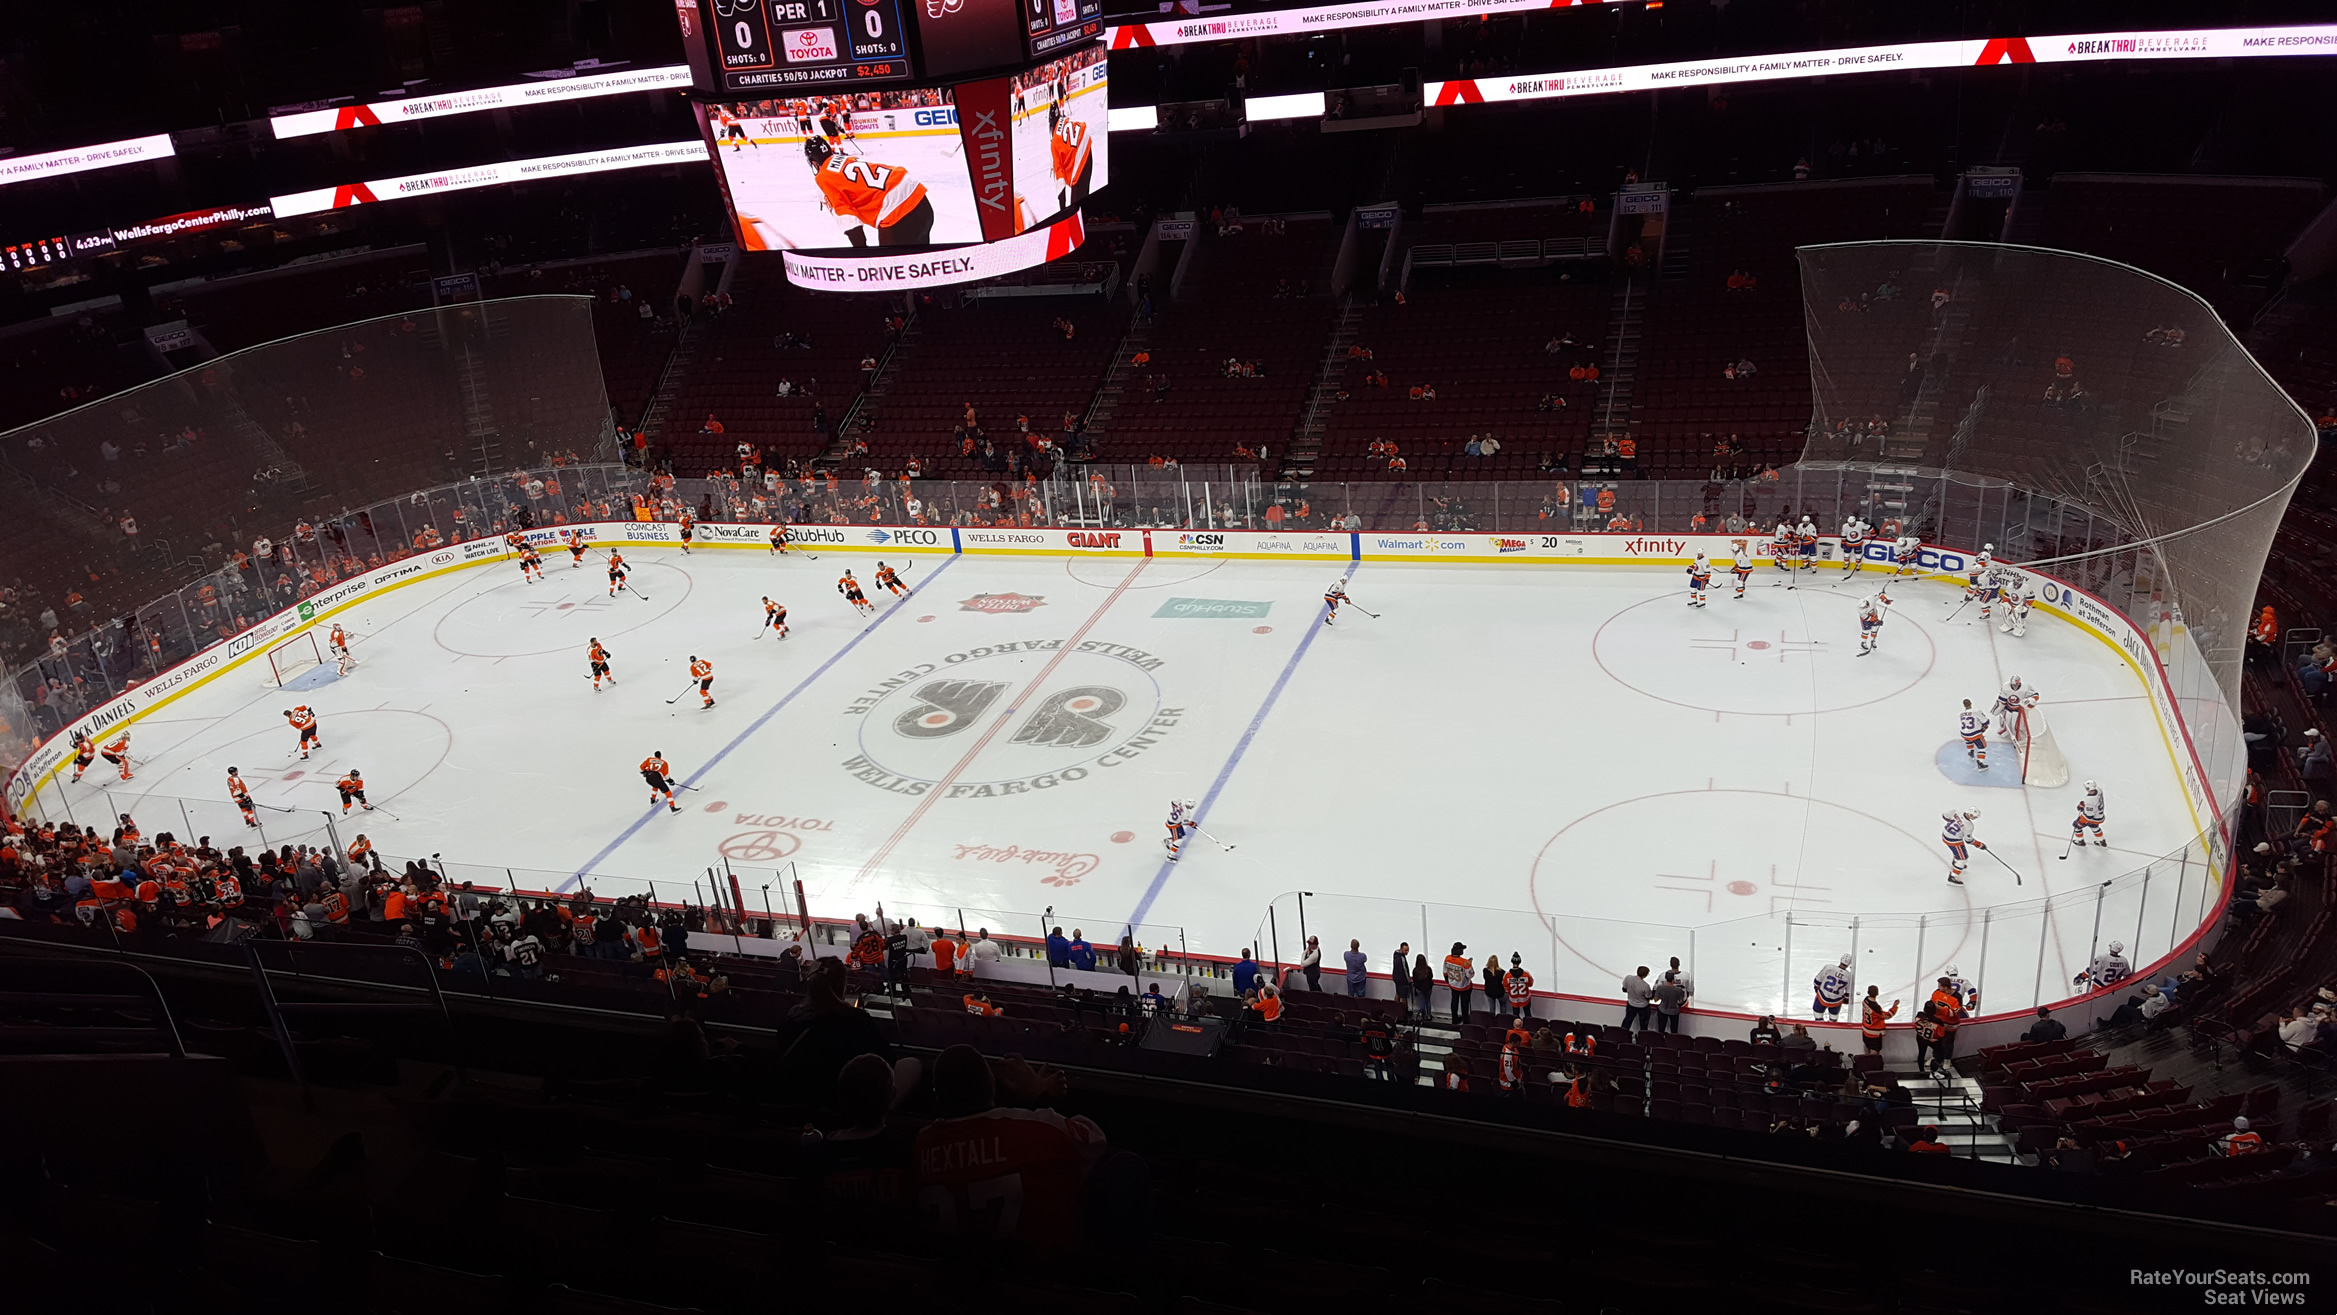 section 203, row 8 seat view  for hockey - wells fargo center